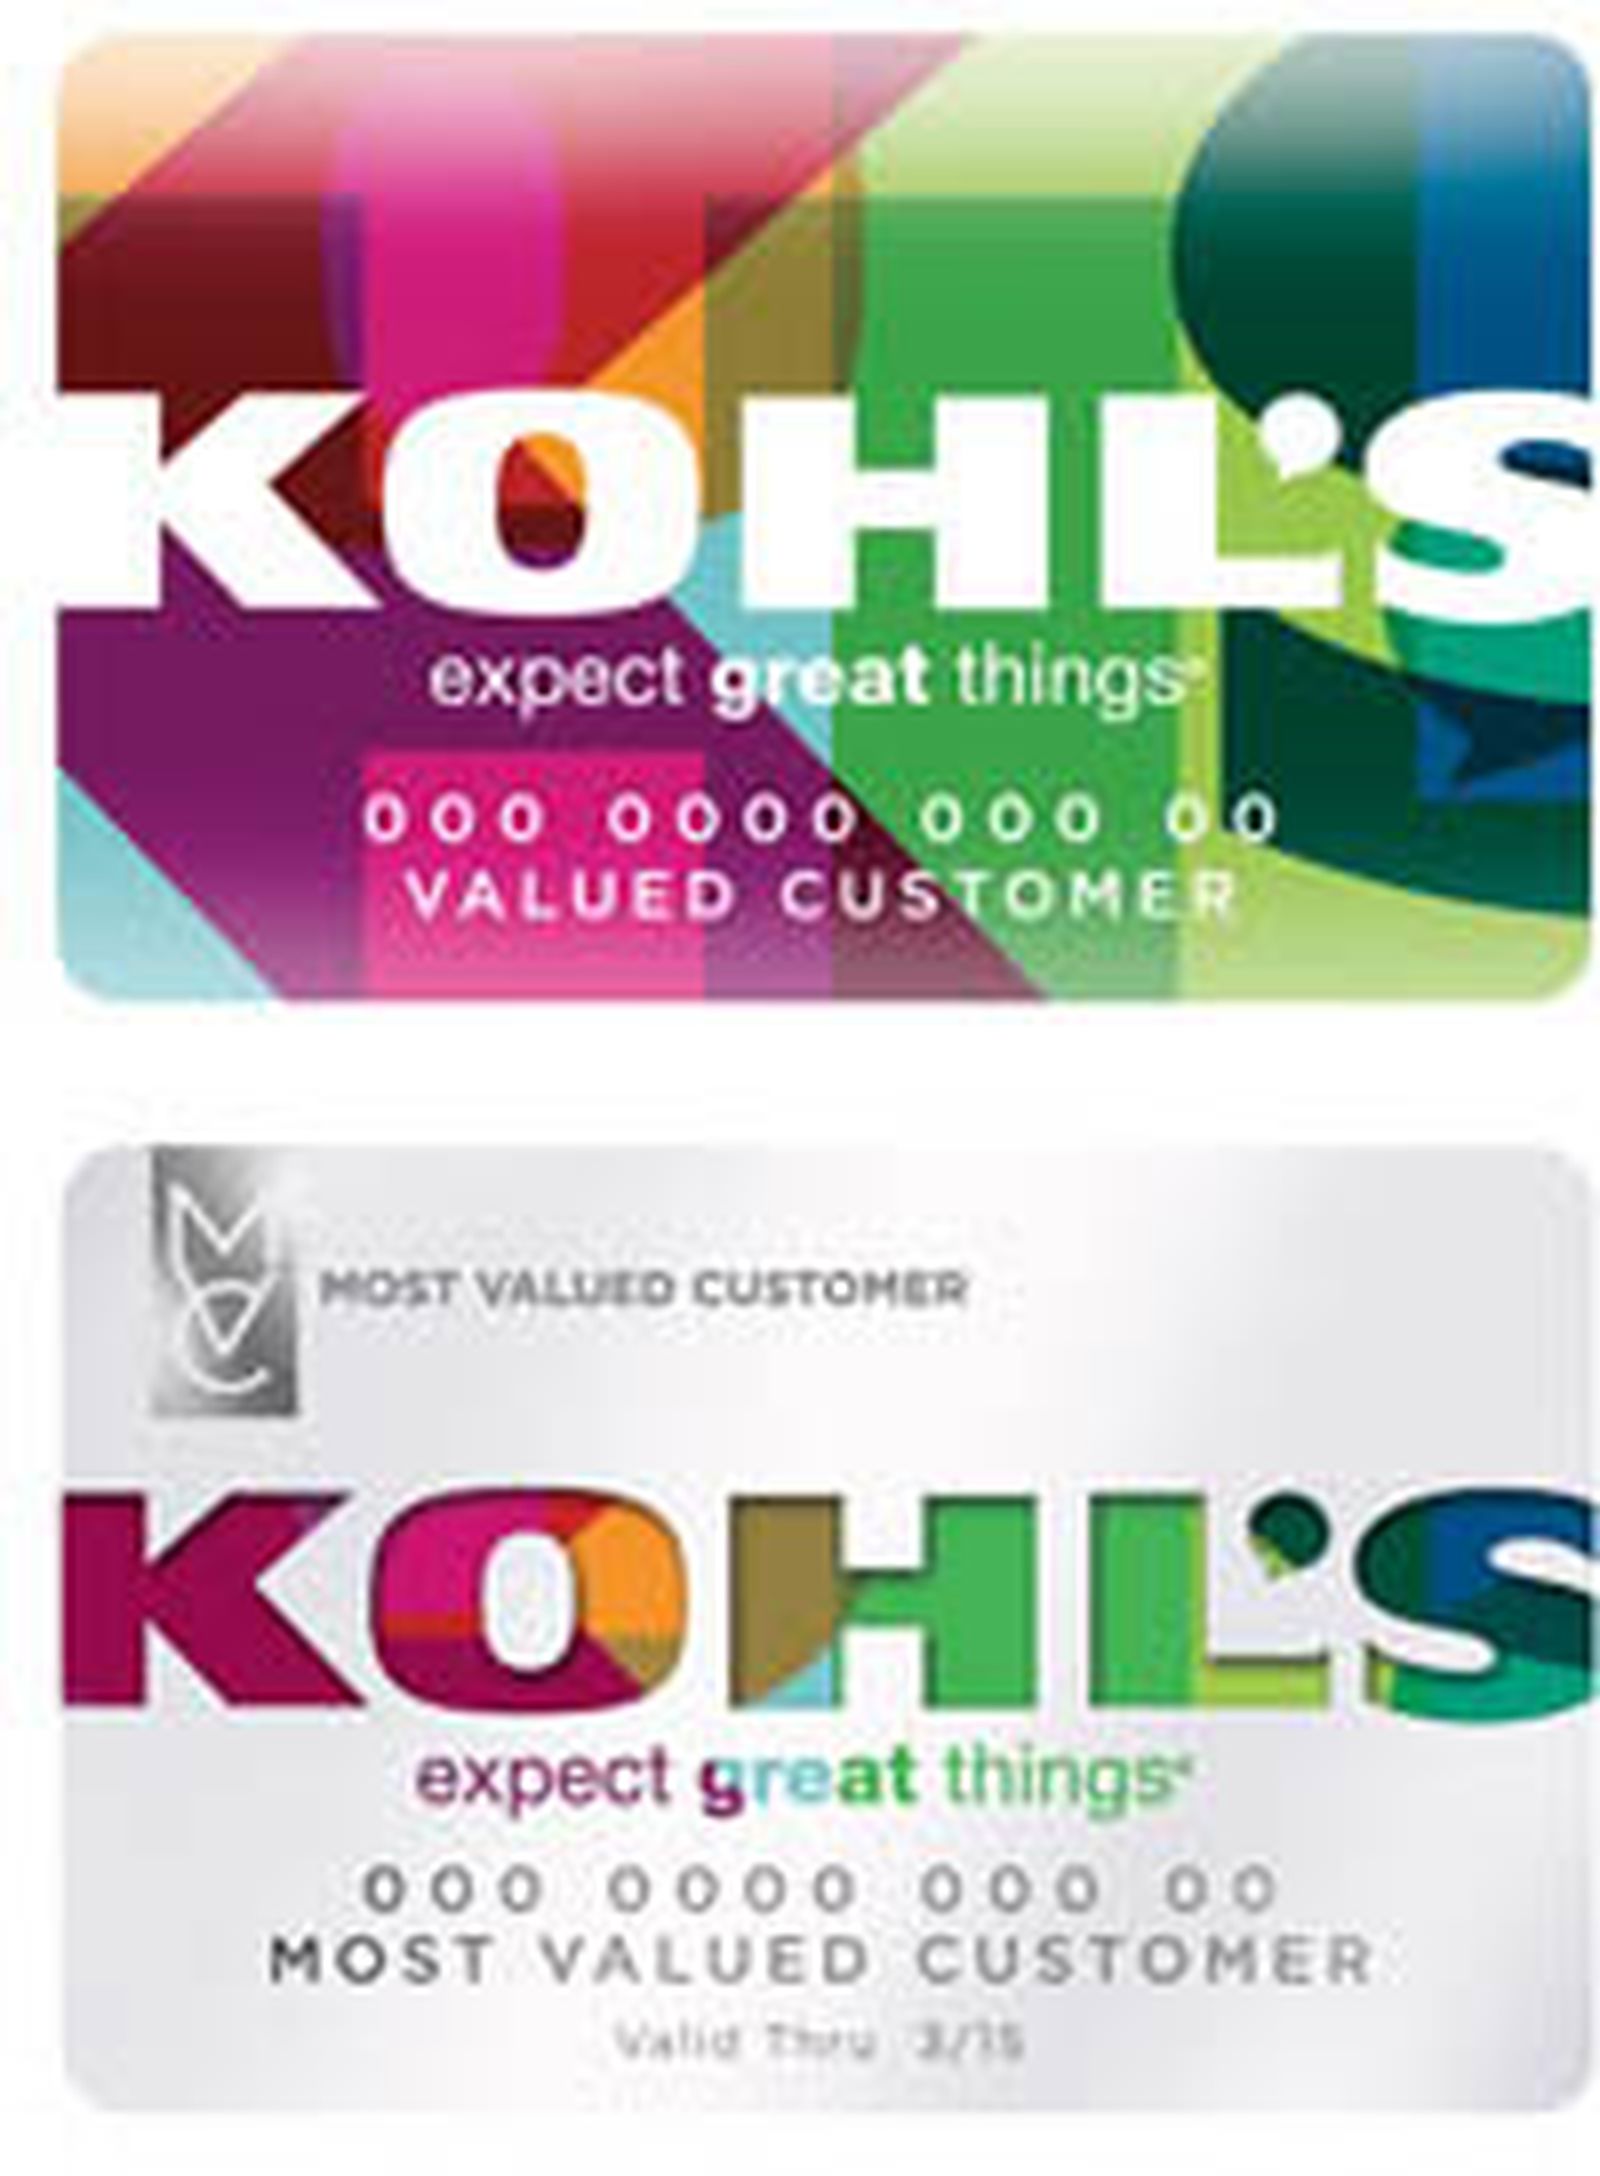 Kohl's Becomes First Retailer to Support Apple Pay for Store-Branded Cards  - MacRumors